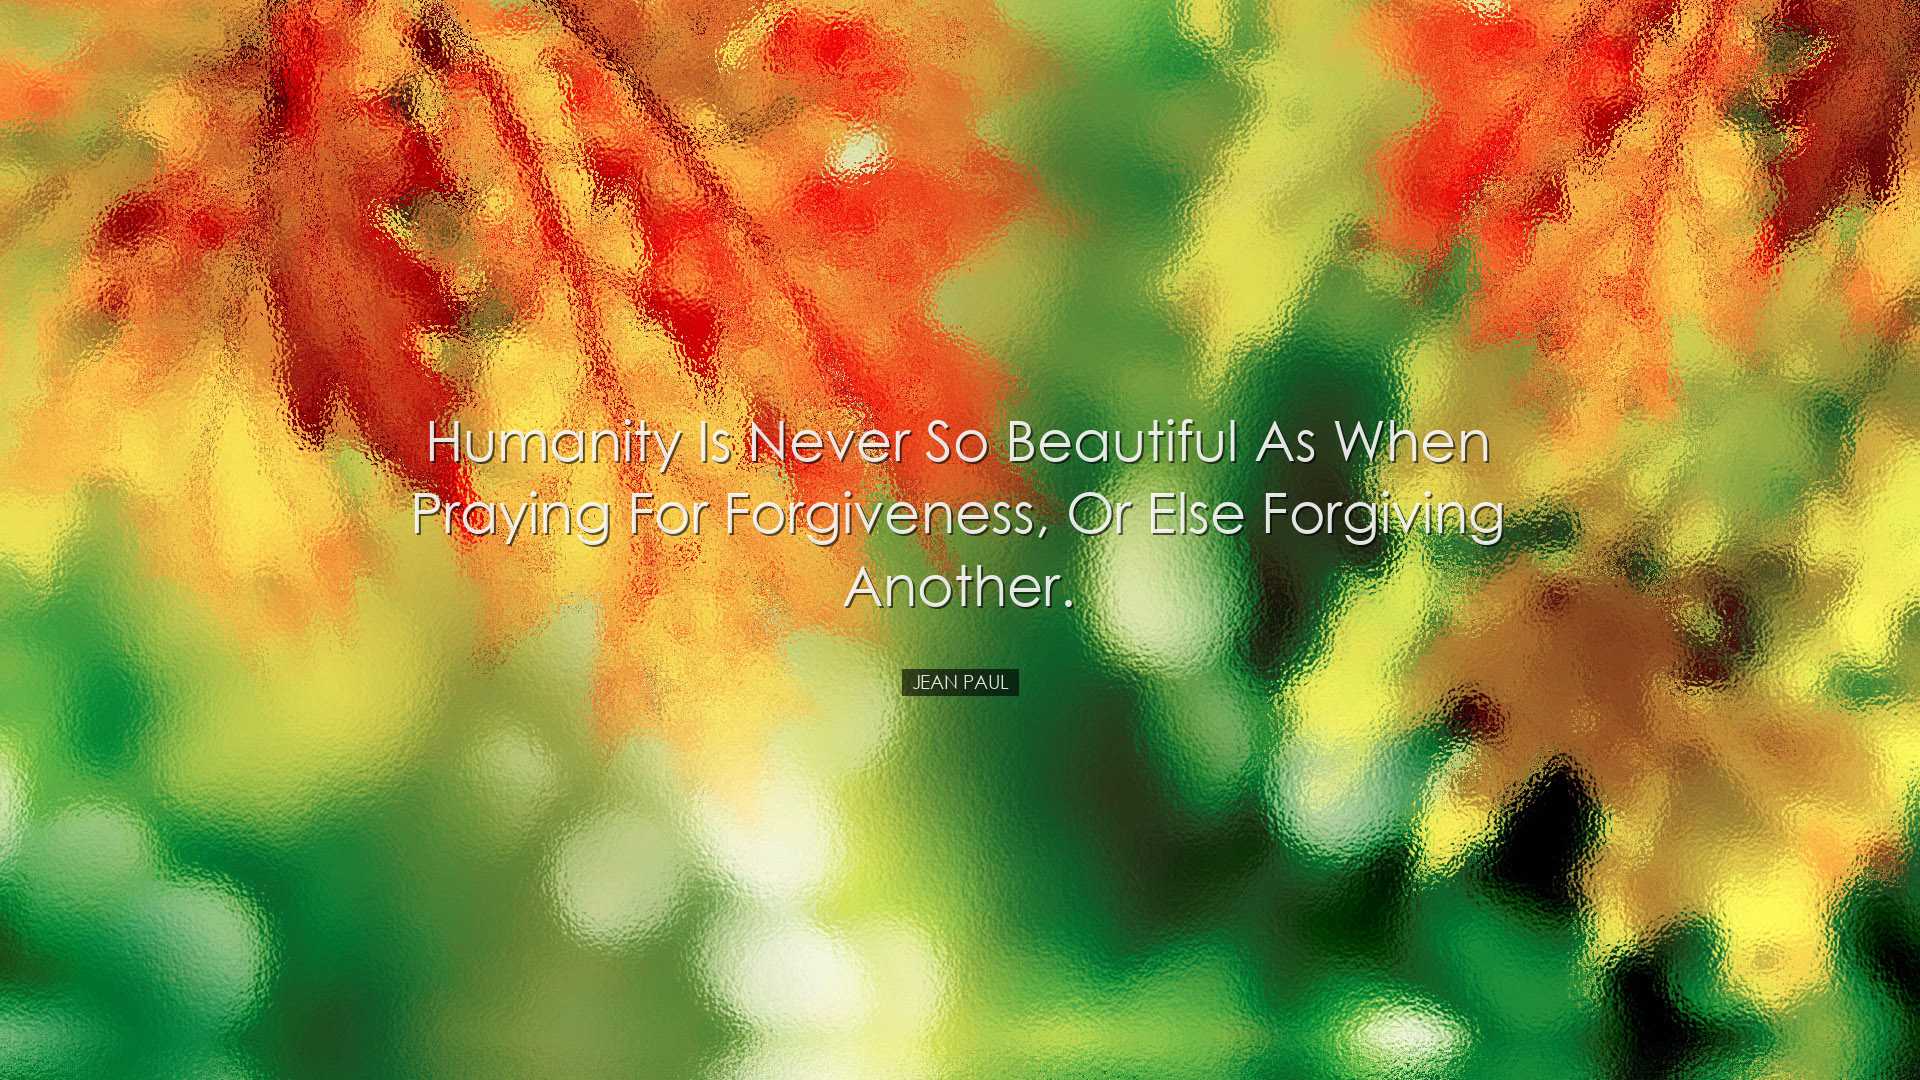 Humanity is never so beautiful as when praying for forgiveness, or